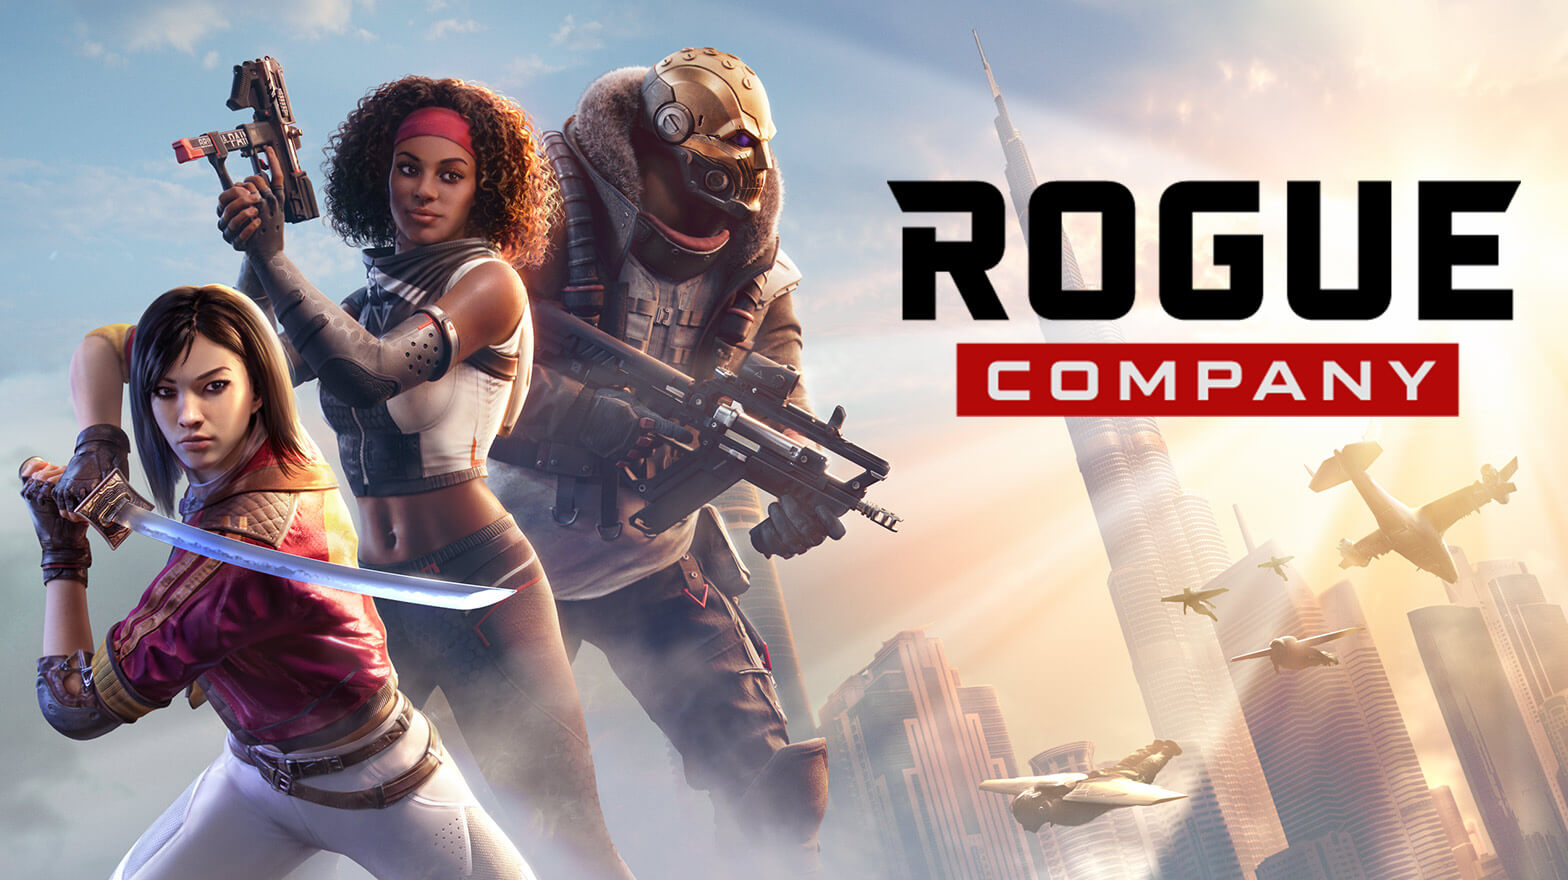 Is Rogue Company playable on any cloud gaming services?